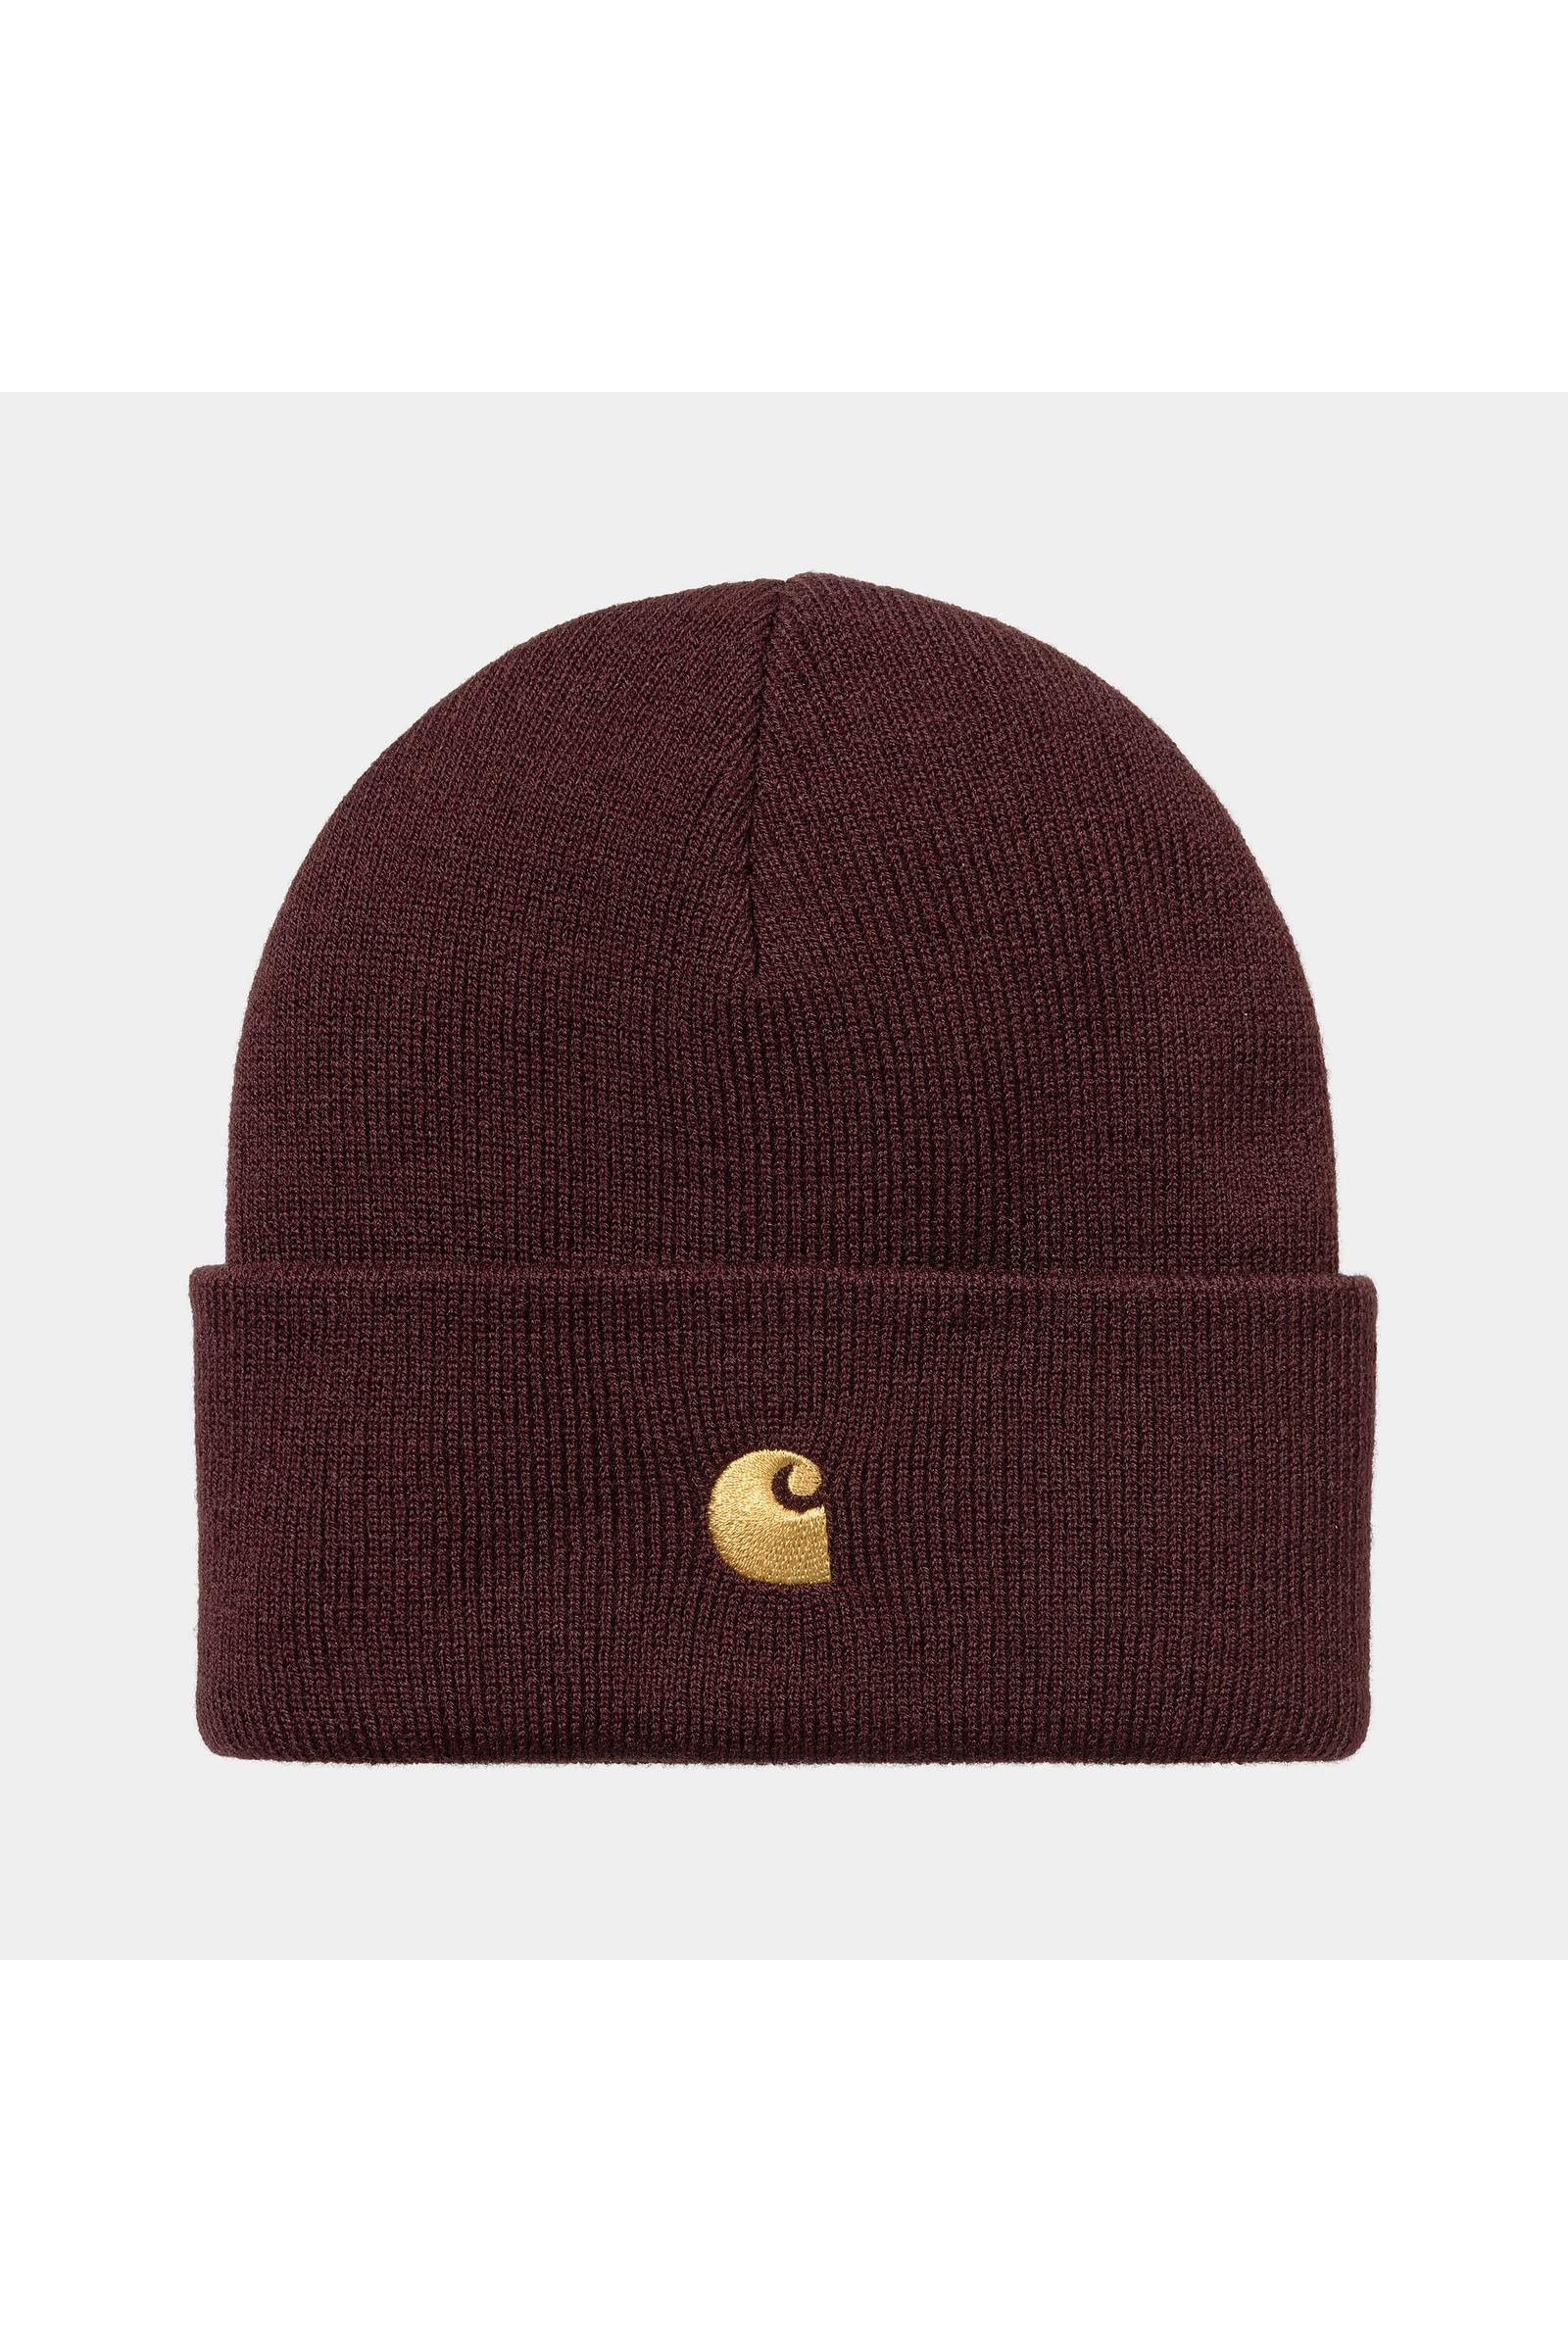 Chase Beanie-Amarone / Gold-Front View